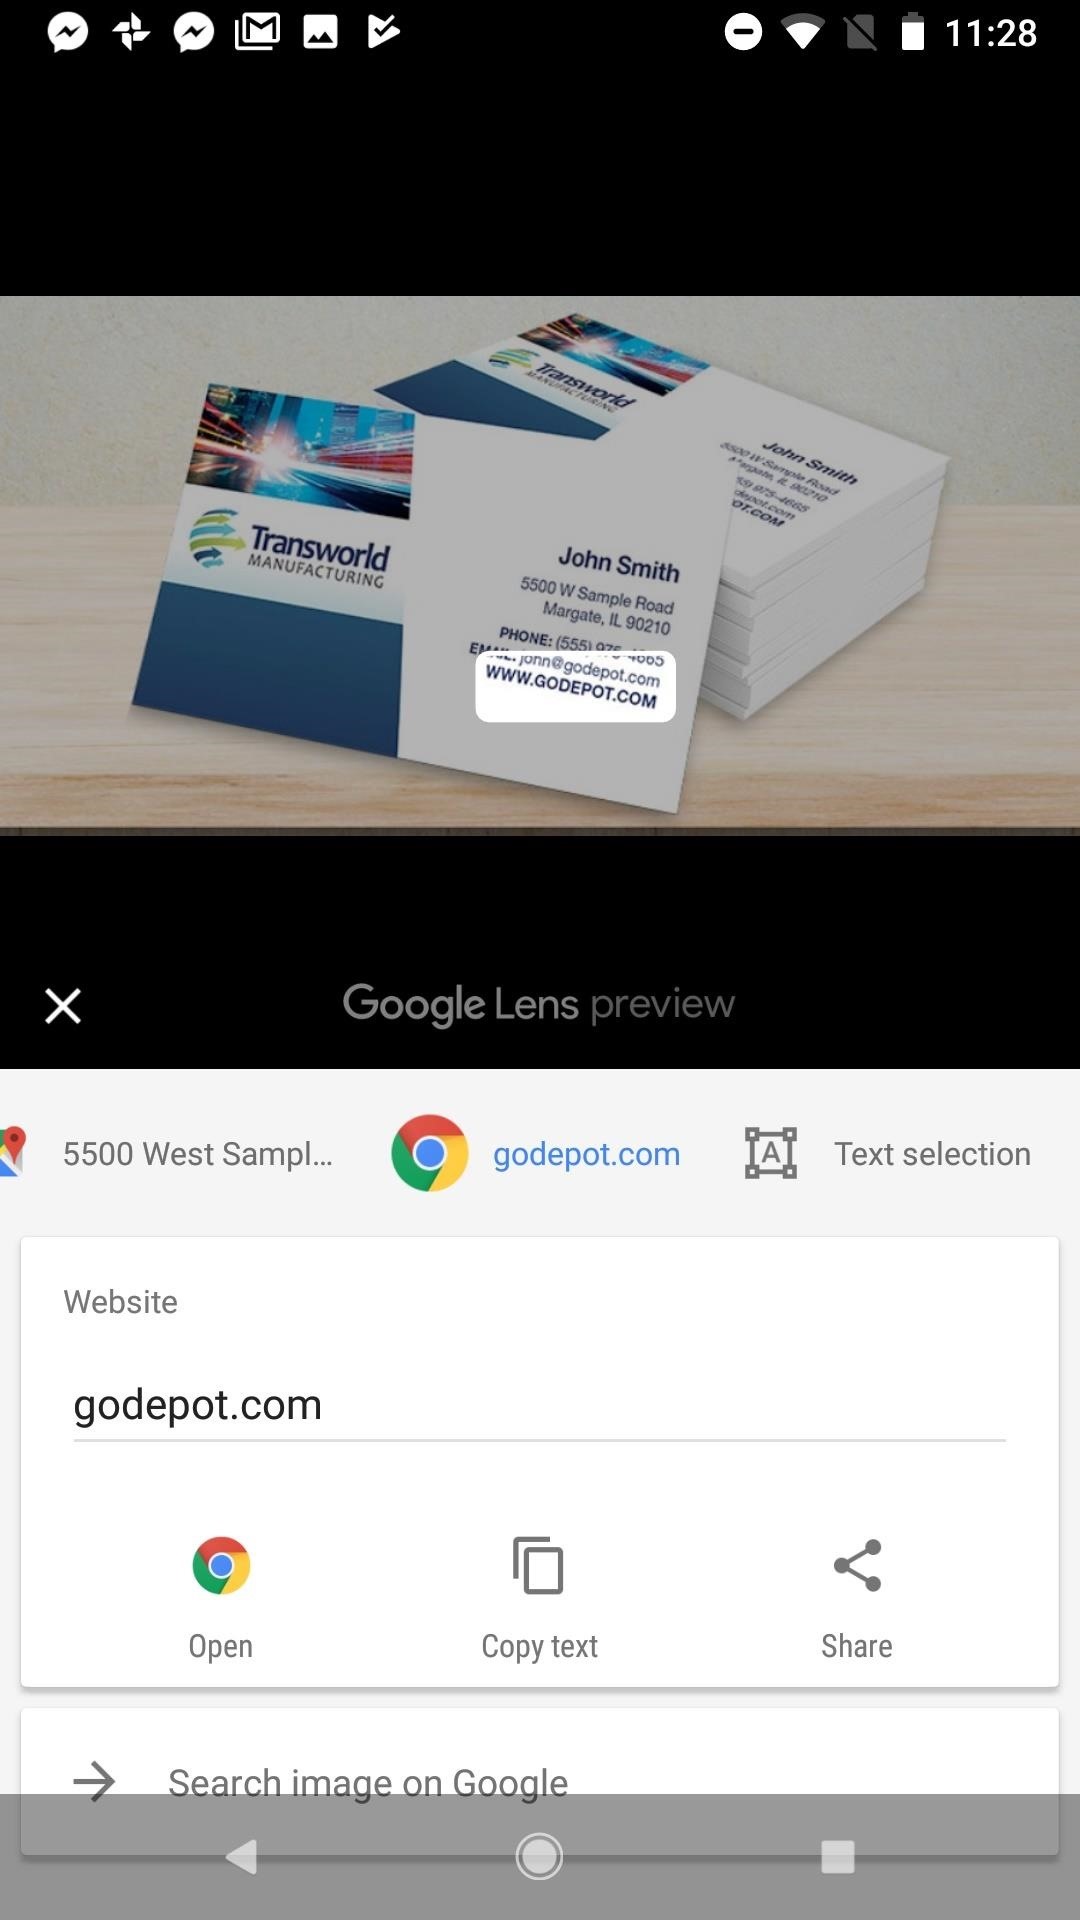 Google Photos 101: How to Use Google Lens to Save Contact Info from Business Cards